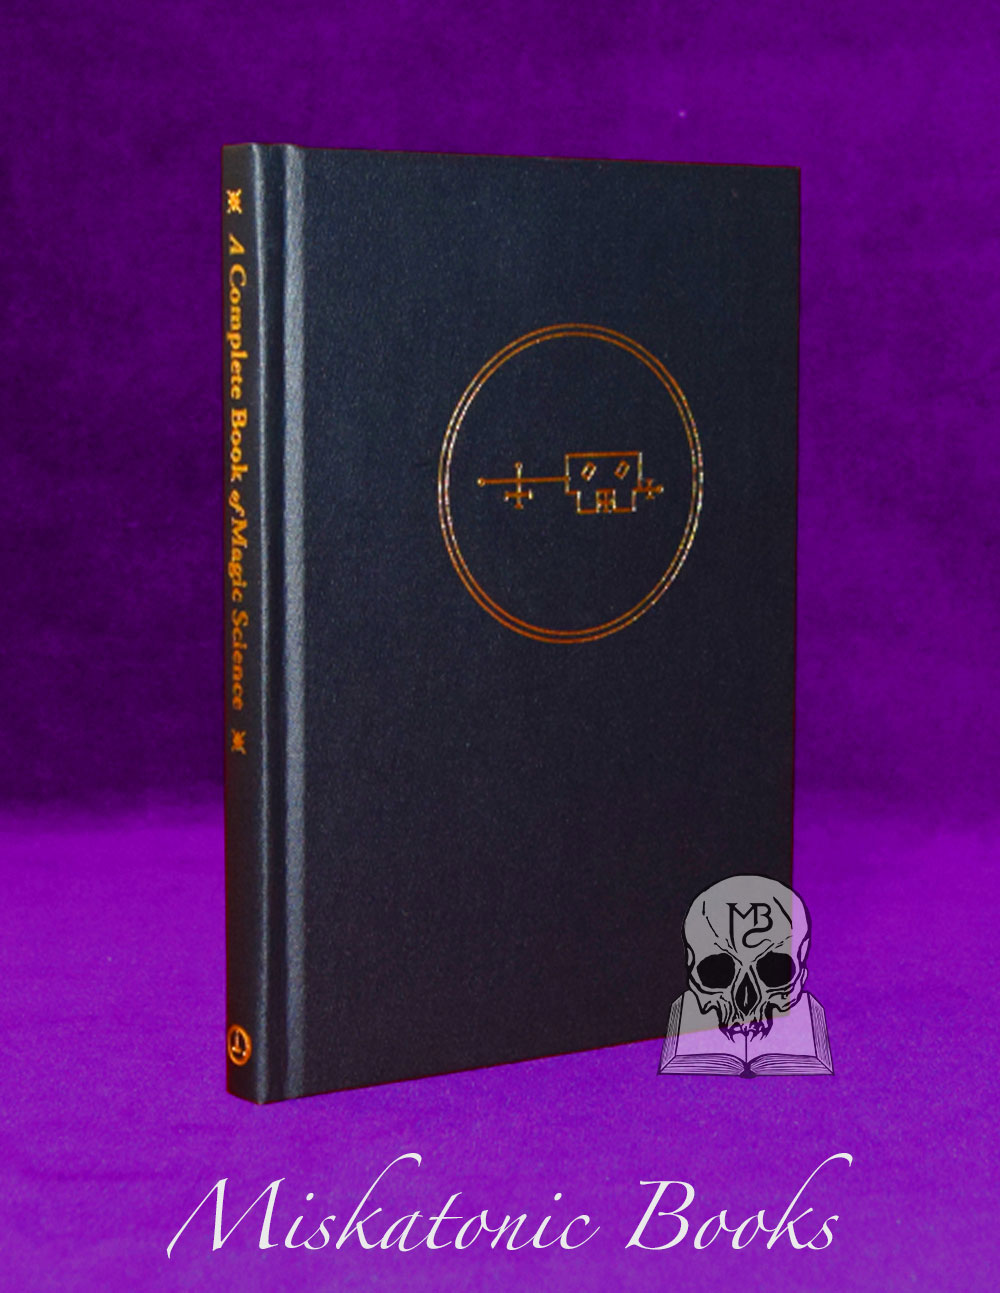 A COMPLETE BOOK OF MAGIC SCIENCE by Frederick Hockley - Limited Edition Hardcover